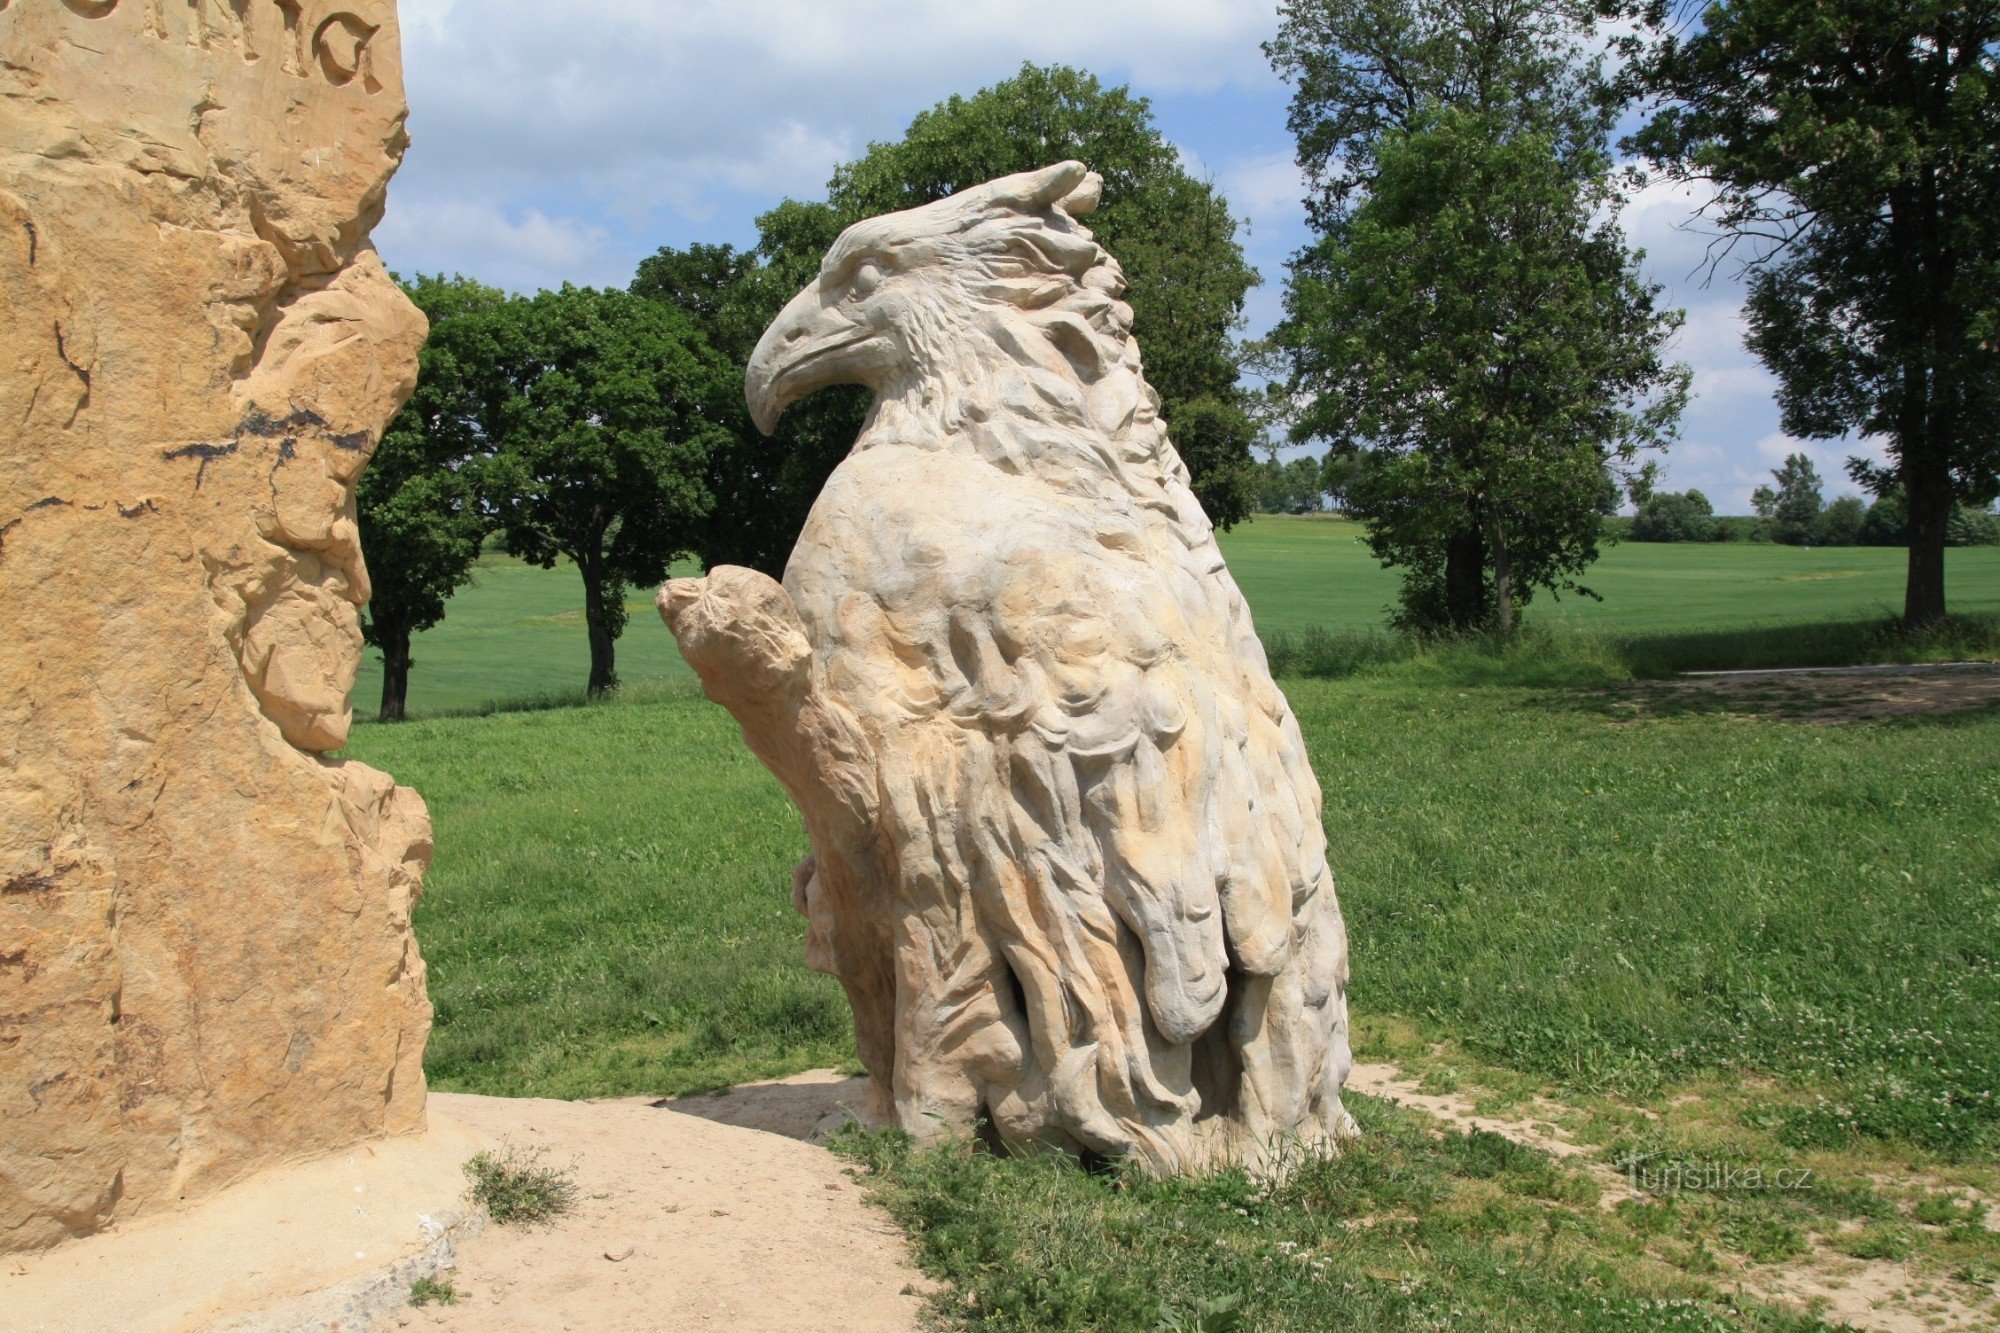 The Moravian eagle guards the road to Moravia